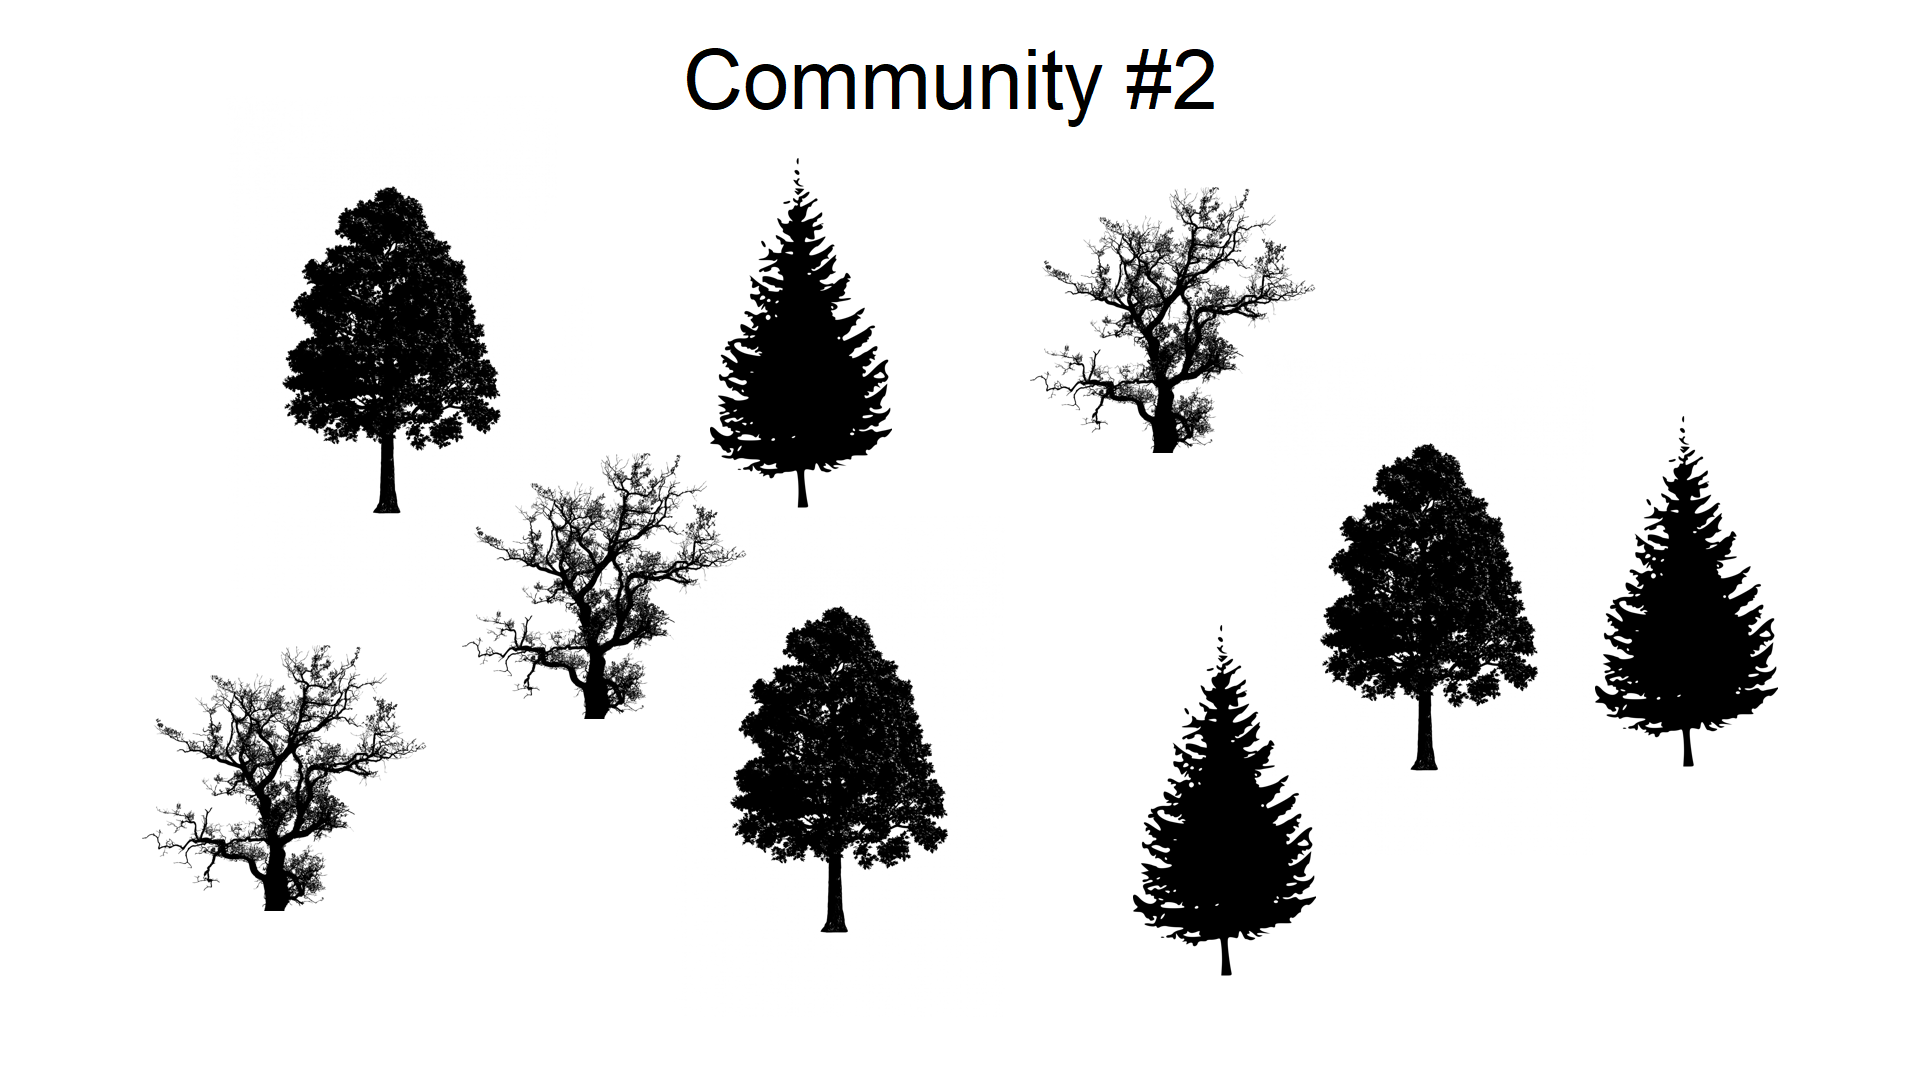 Tree community #2 has three individuals each for the irregularly branching species, the species with densely packed leaves, and the conifer species.